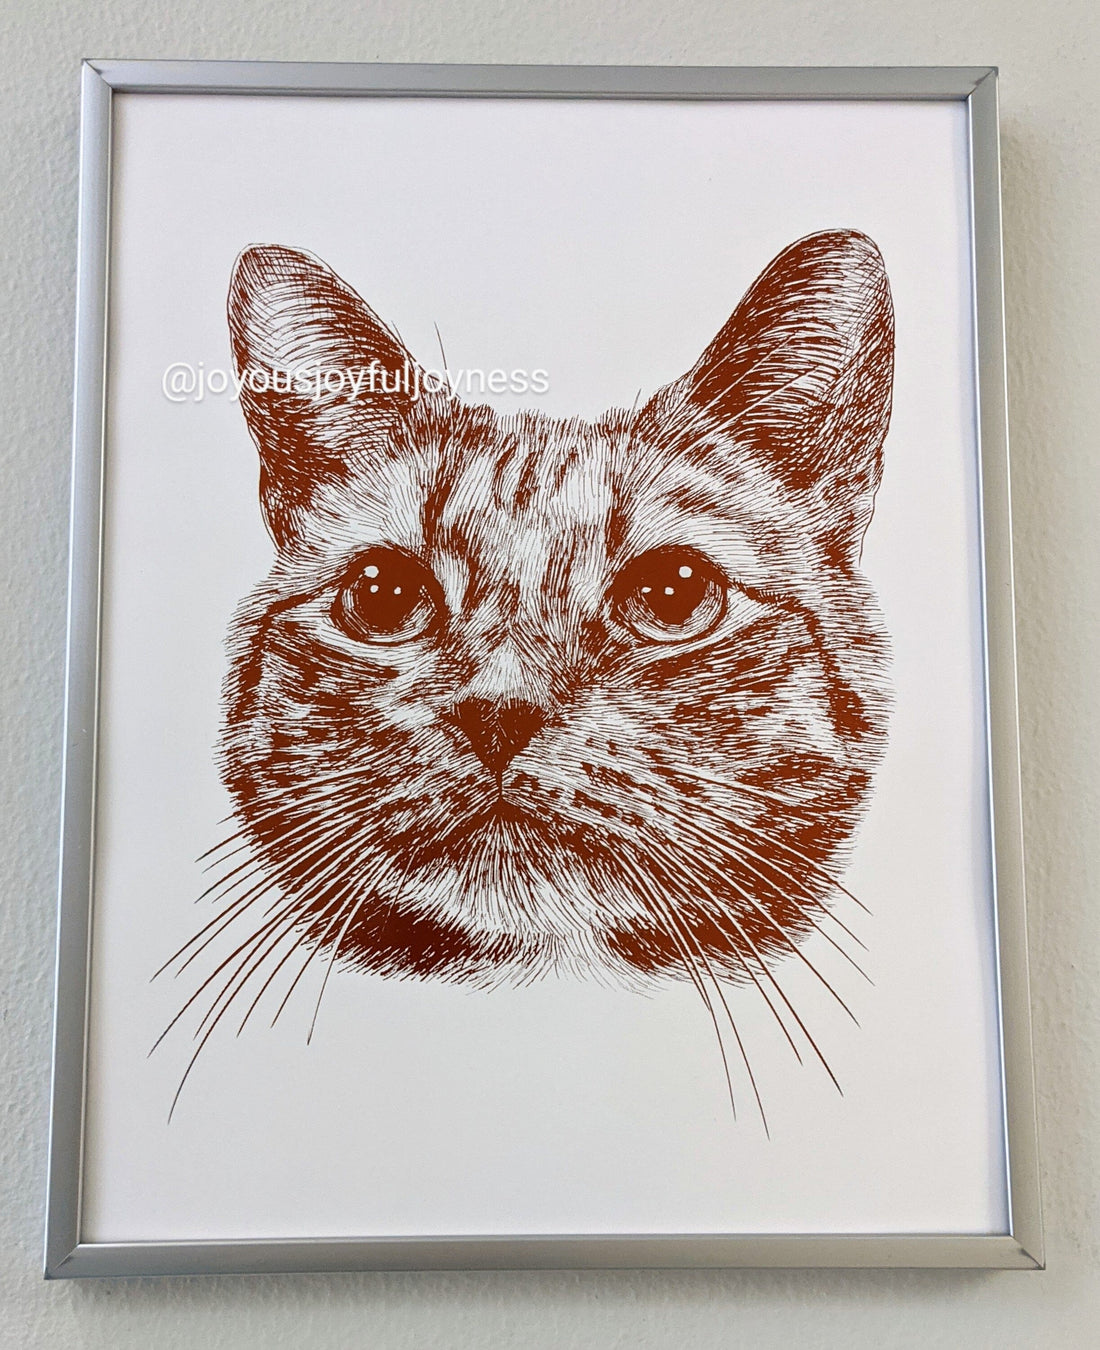 Top 8 Gifts For Cat Lovers